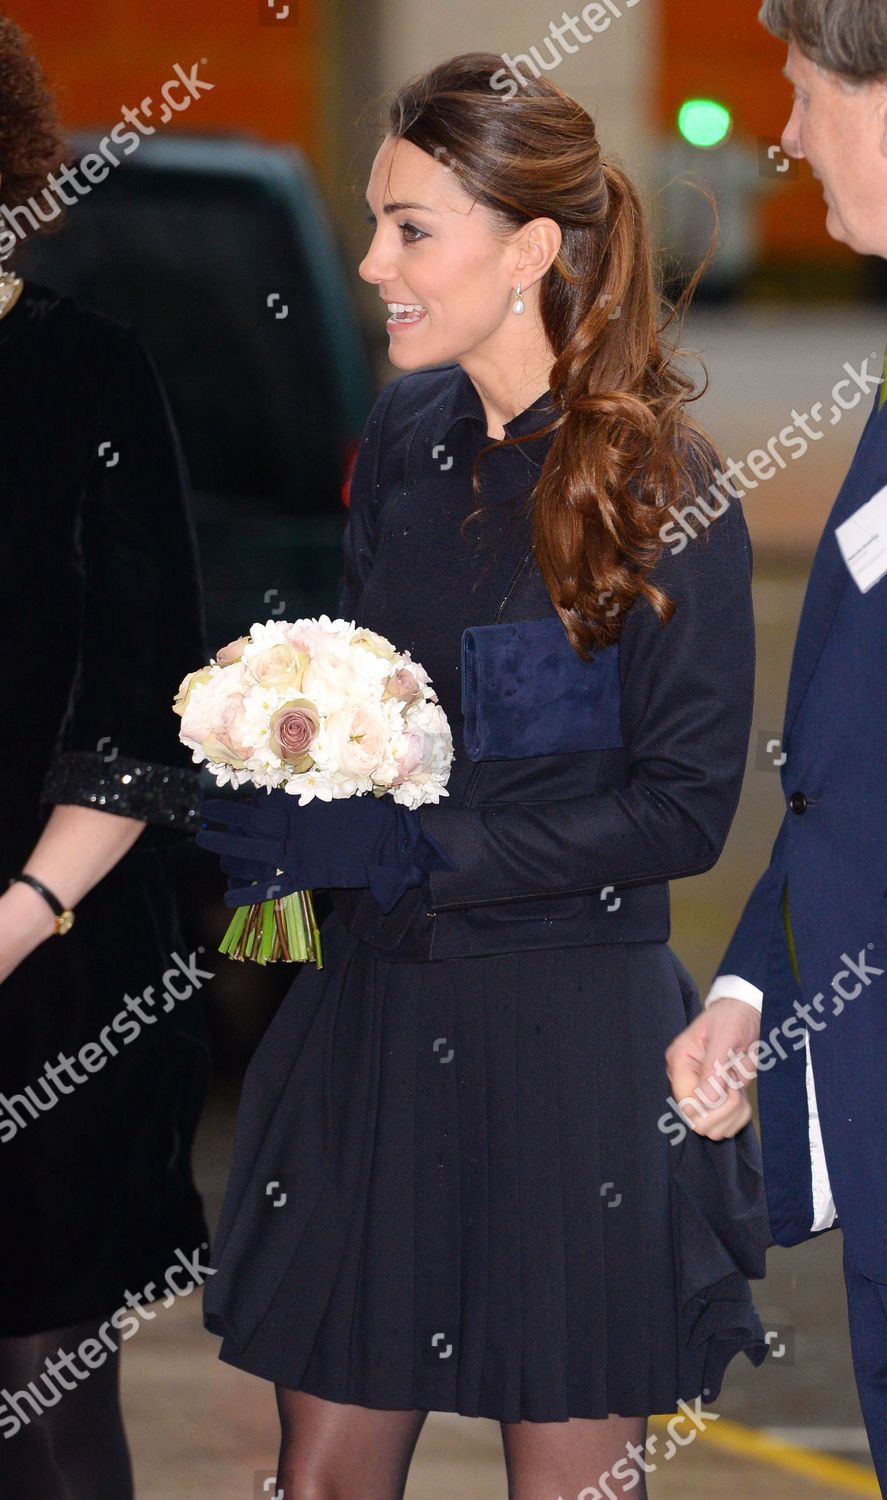 catherine-duchess-of-cambridge-attends-a-forum-for-the-charity-place2be-canary-wharf-london-britain-shutterstock-editorial-3384450ae.jpg